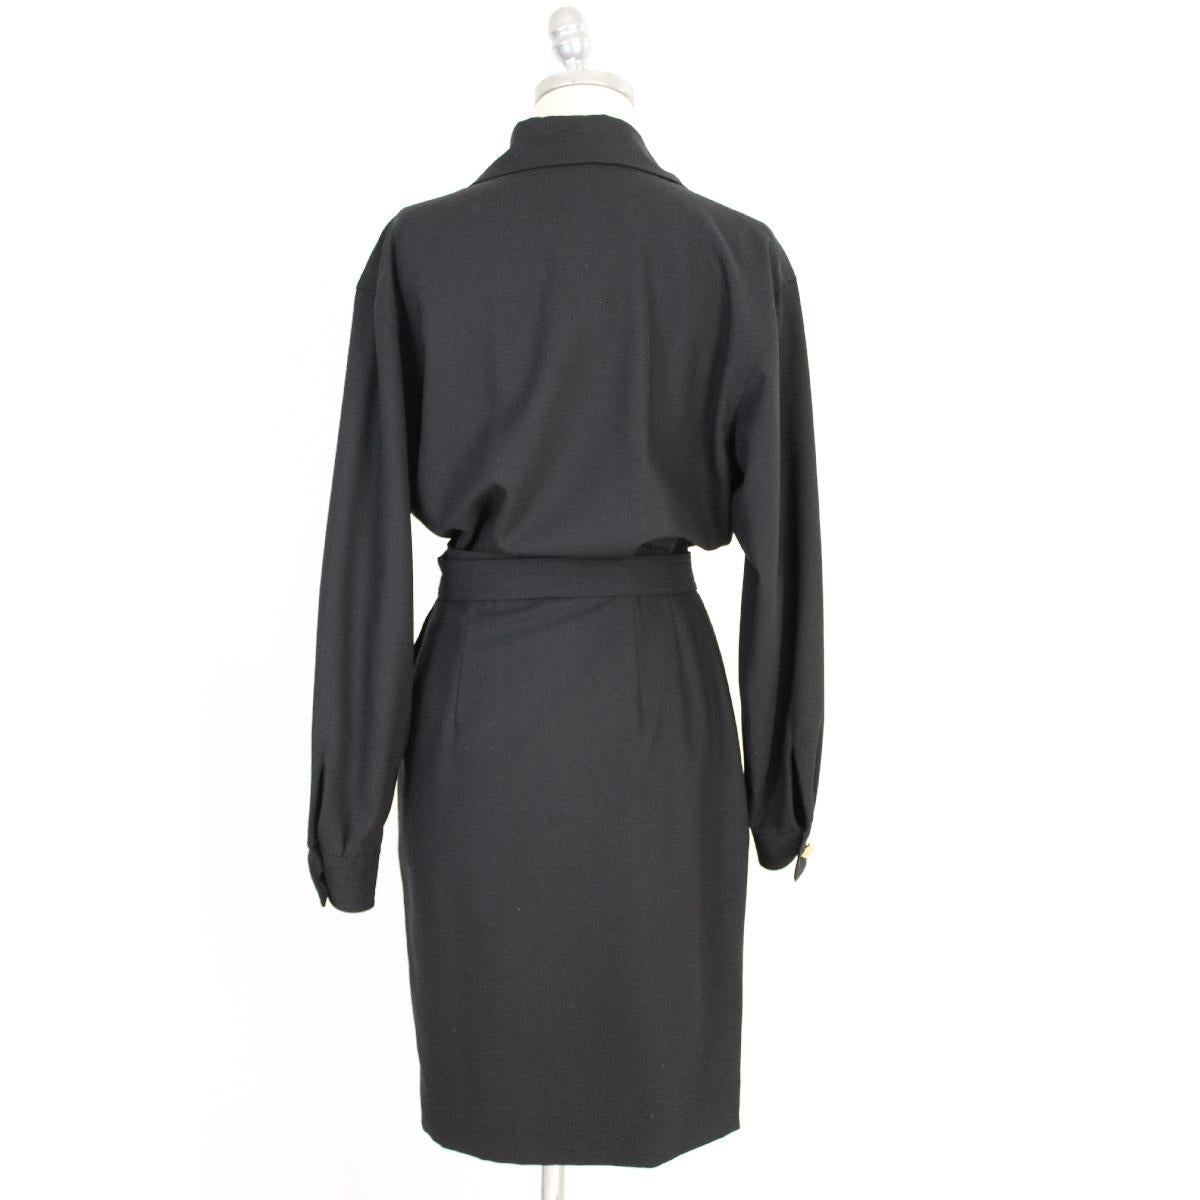 Salvatore Ferragamo black wool cocktail dress. Long-sleeved dress, wallet skirt. Gold-colored jewel button. Waist belt with golden medallion with logo. Silk lined skirt. Two side pockets. New with label. Replacement buttons included.

Size 44 It 10